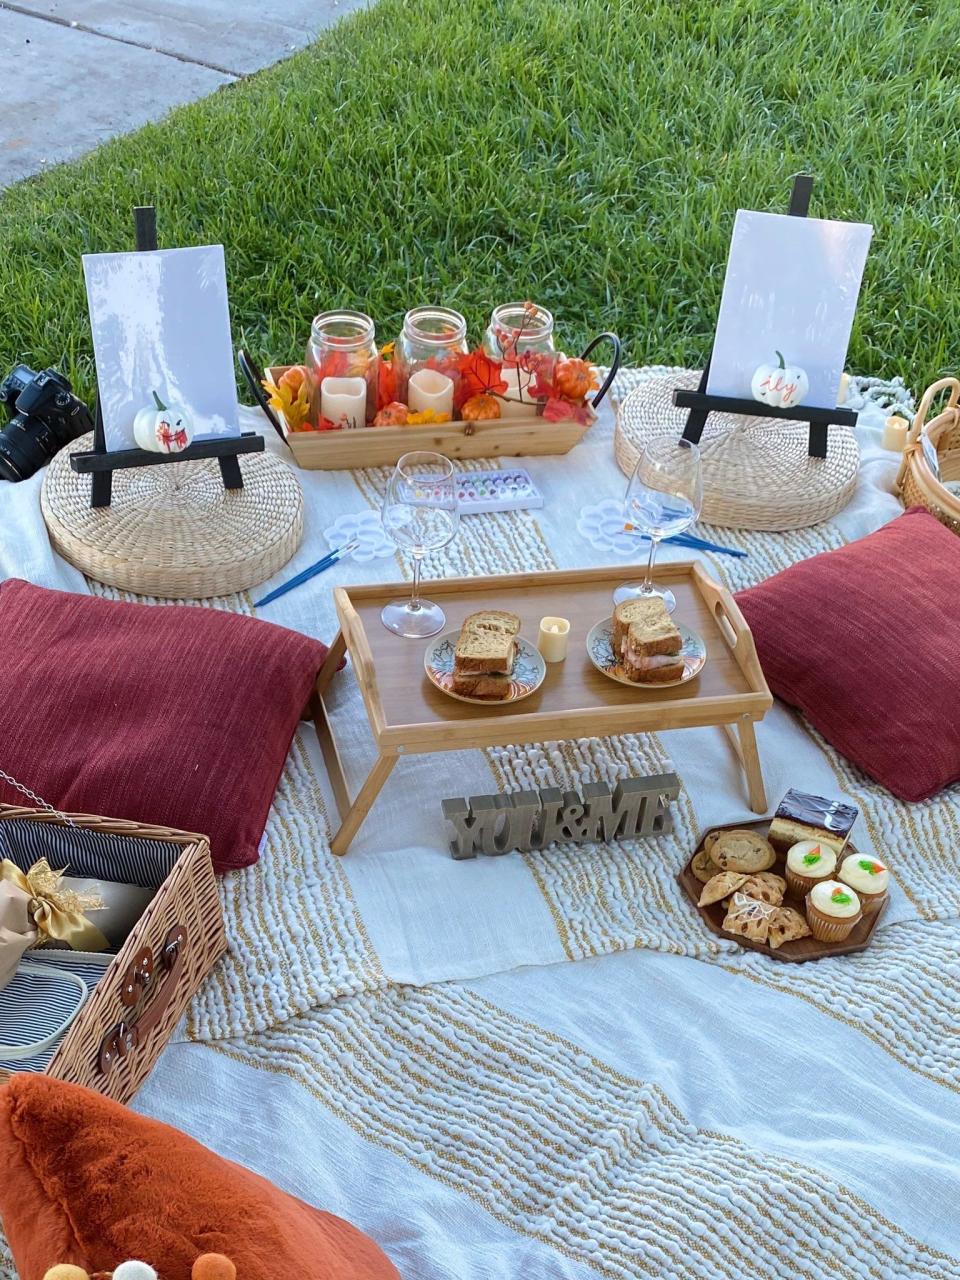 Cute Picnic Ideas For Couples